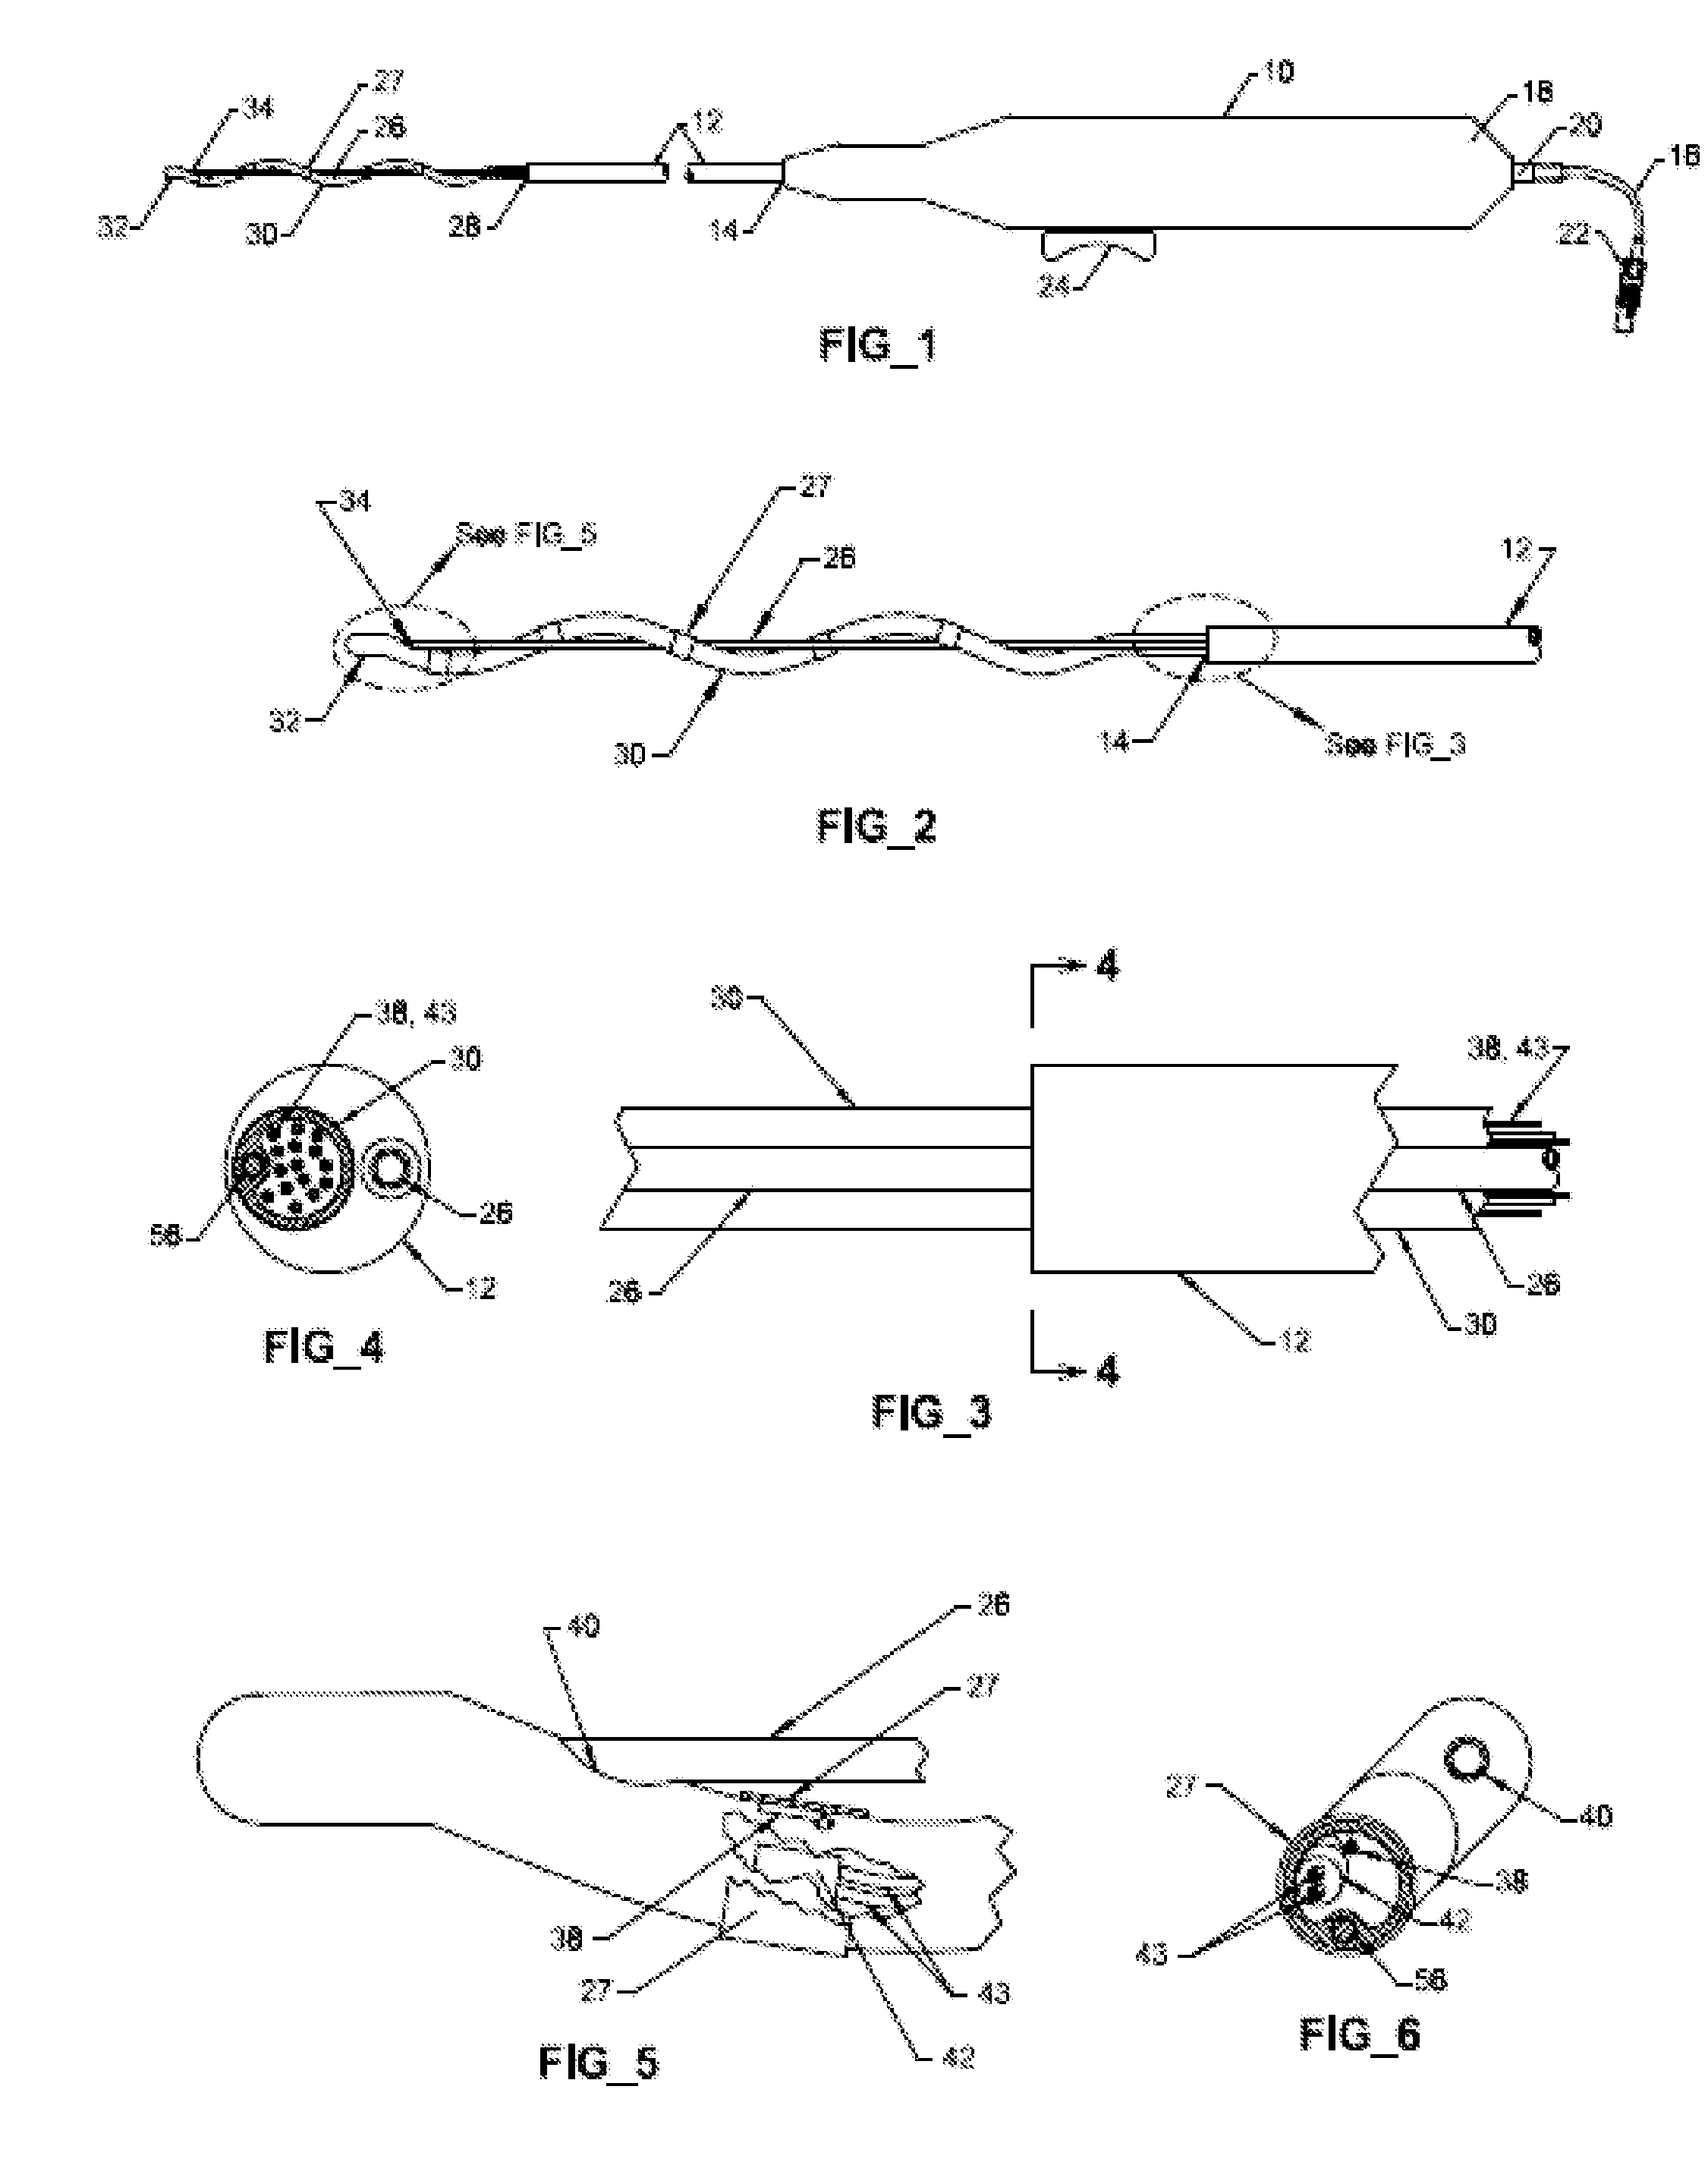 Helical DeNervation Ablation Catheter Apparatus